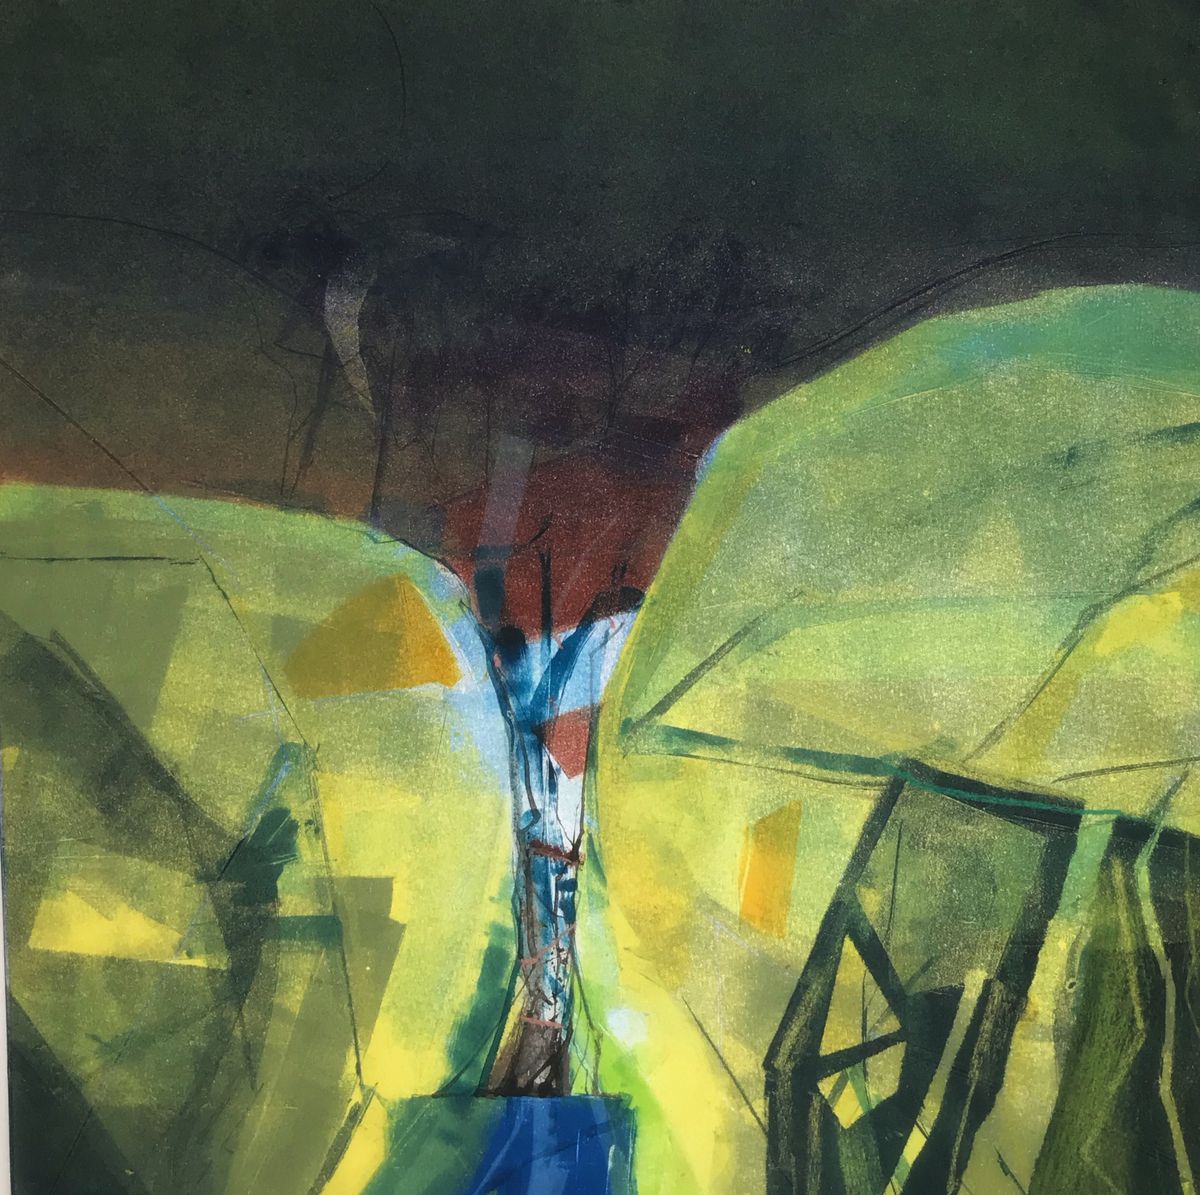  Steep Valley, Falling Water  monotype  50 x 60 cm  £395 